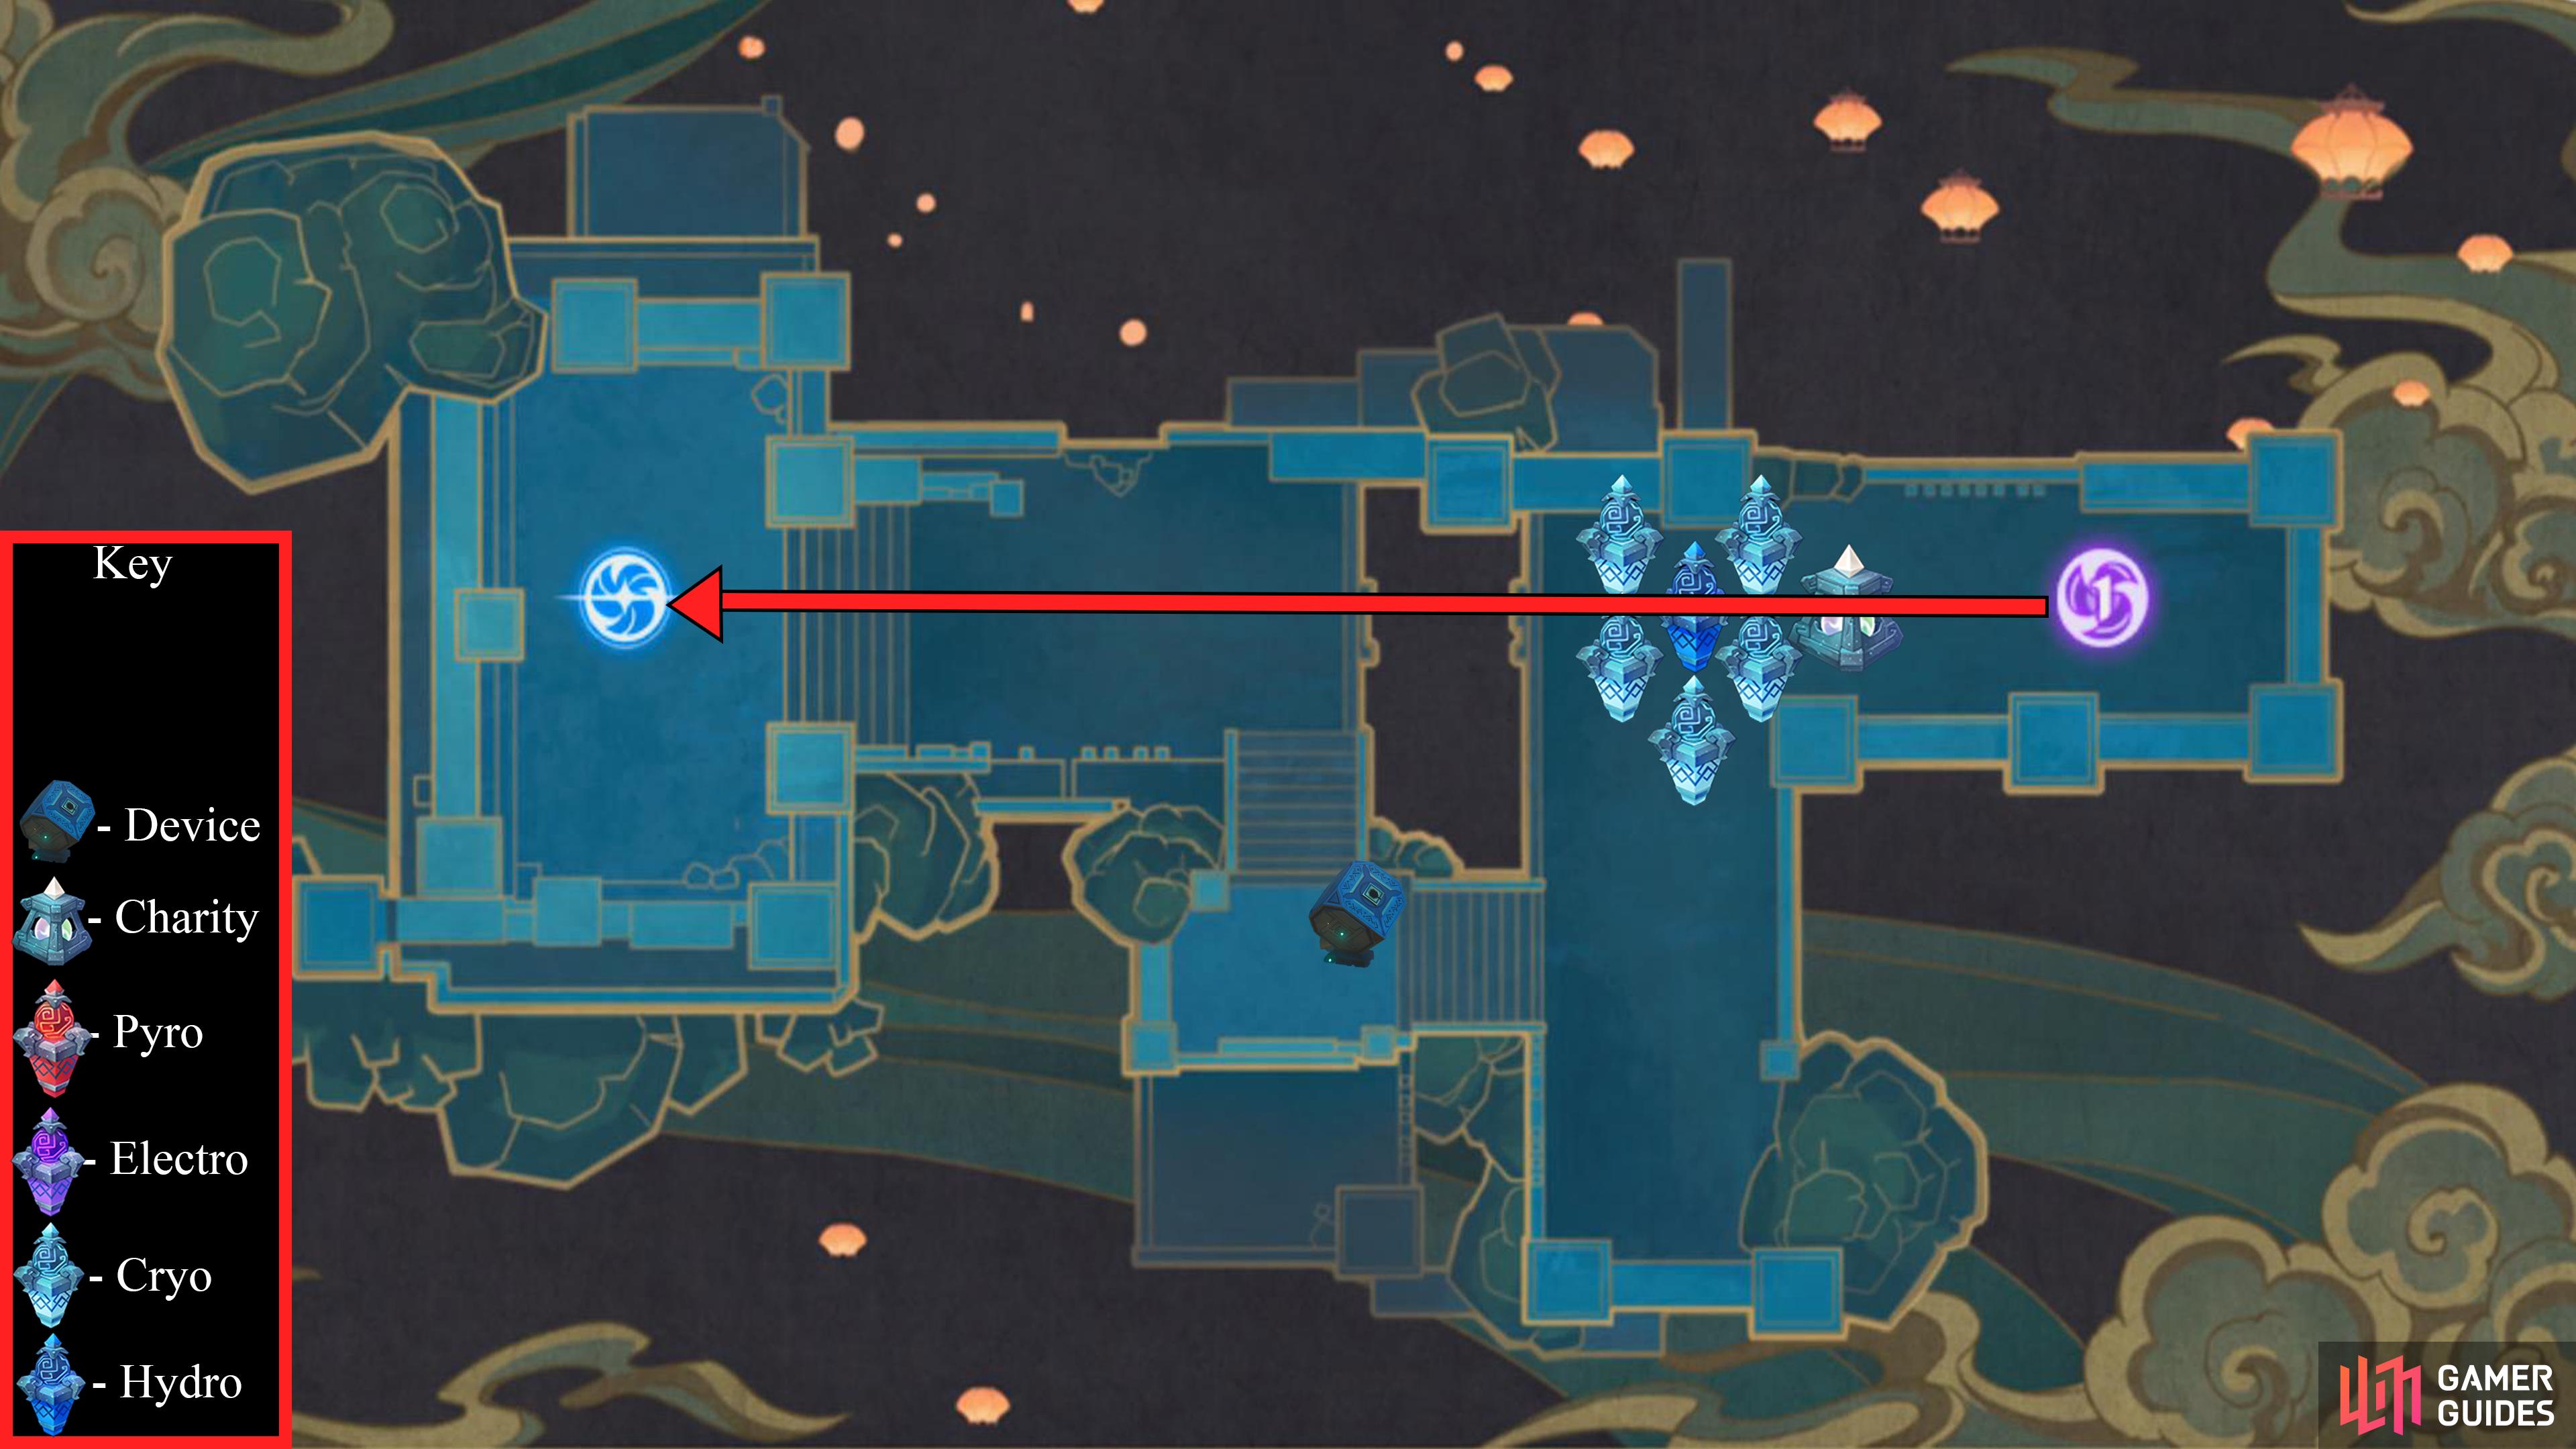 Place four Cryo Mechanici, and one Hydro closest to the enemy portal.